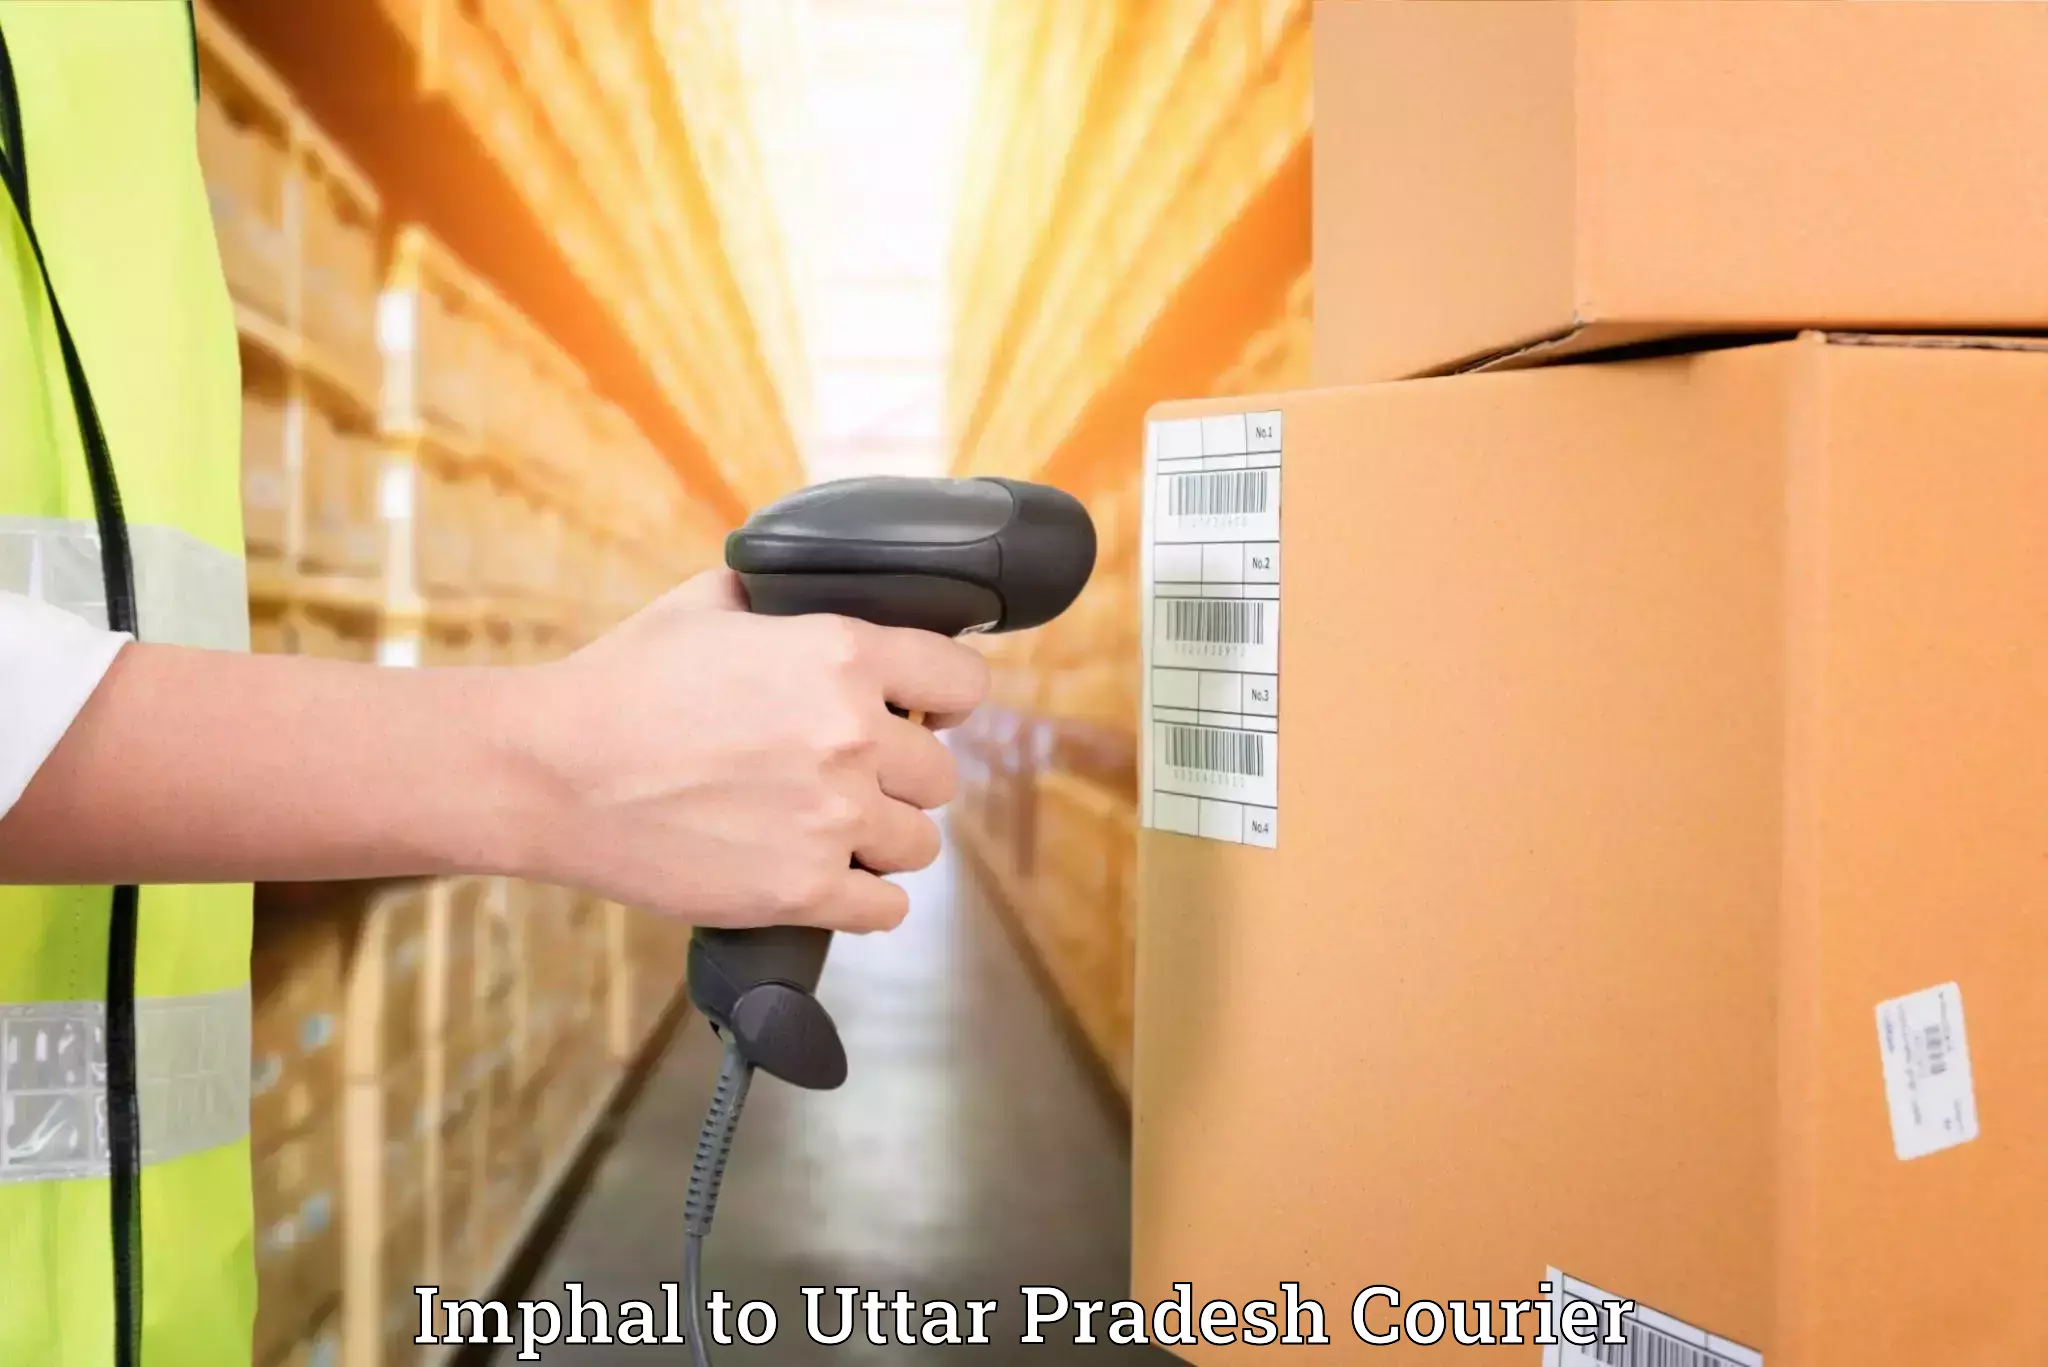 Home moving specialists Imphal to Agra